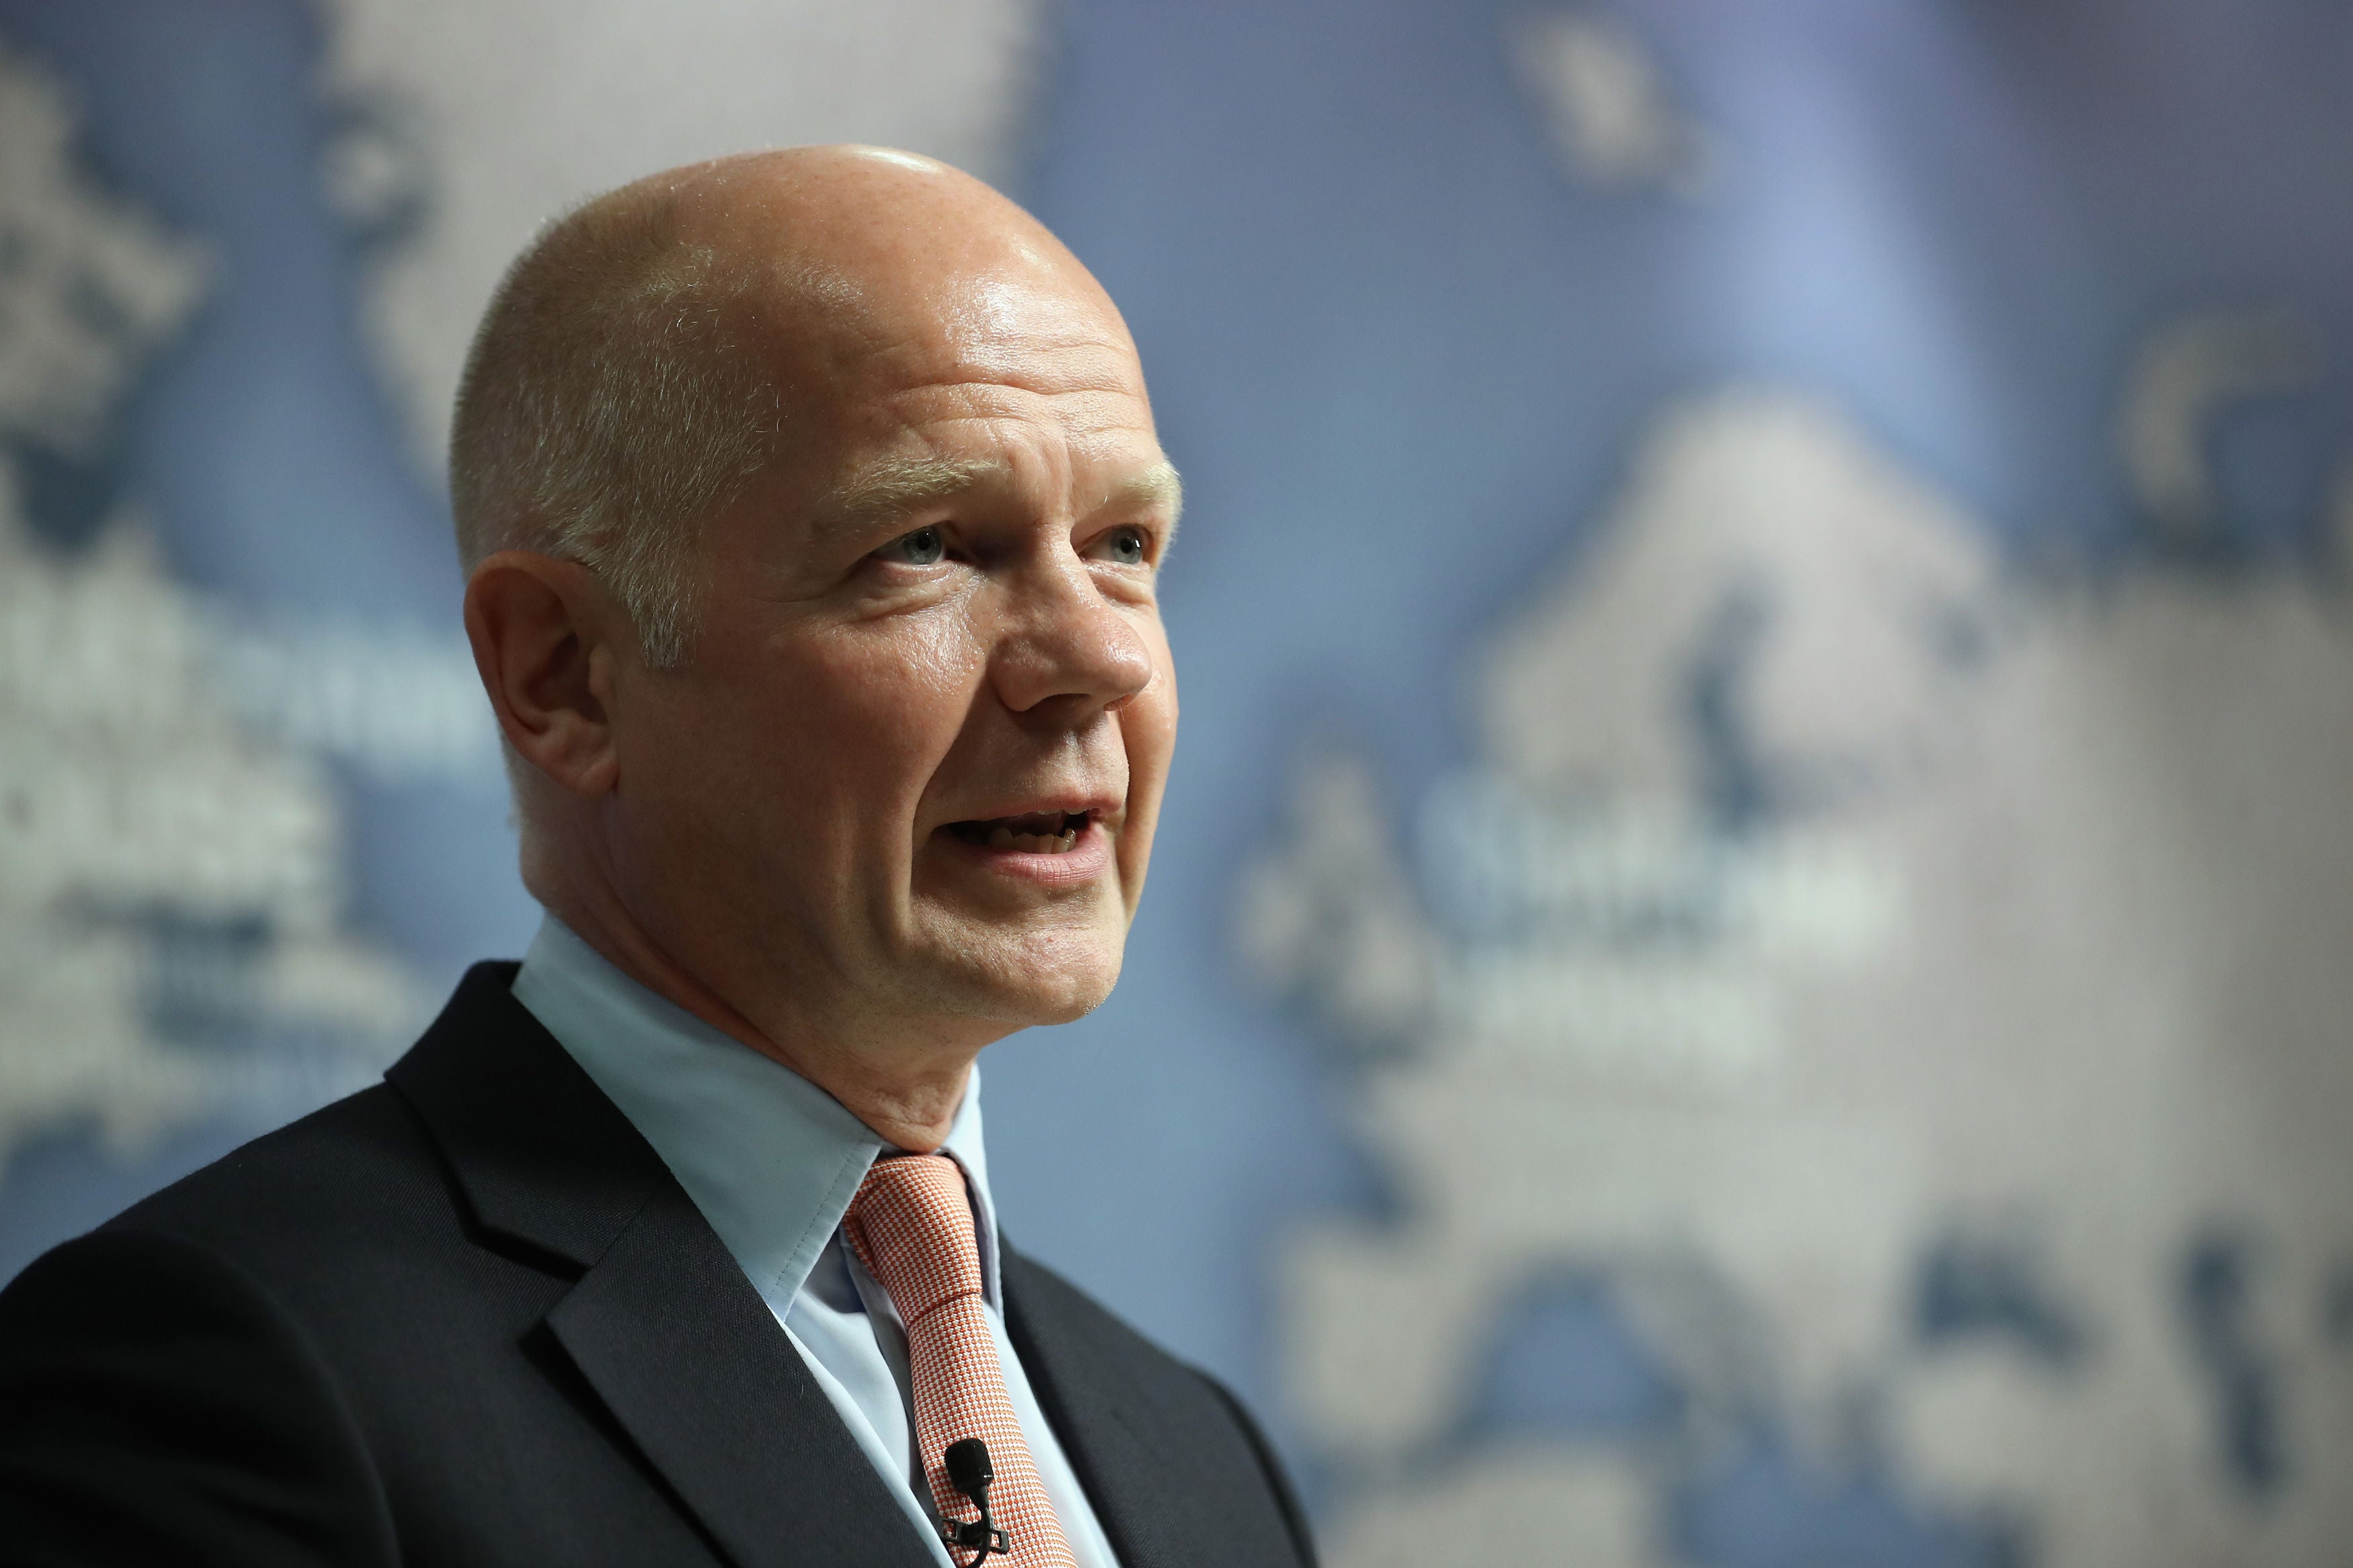 Lord Hague said the Prime Minister is ‘in real trouble’ (Dan Kitwood/PA)